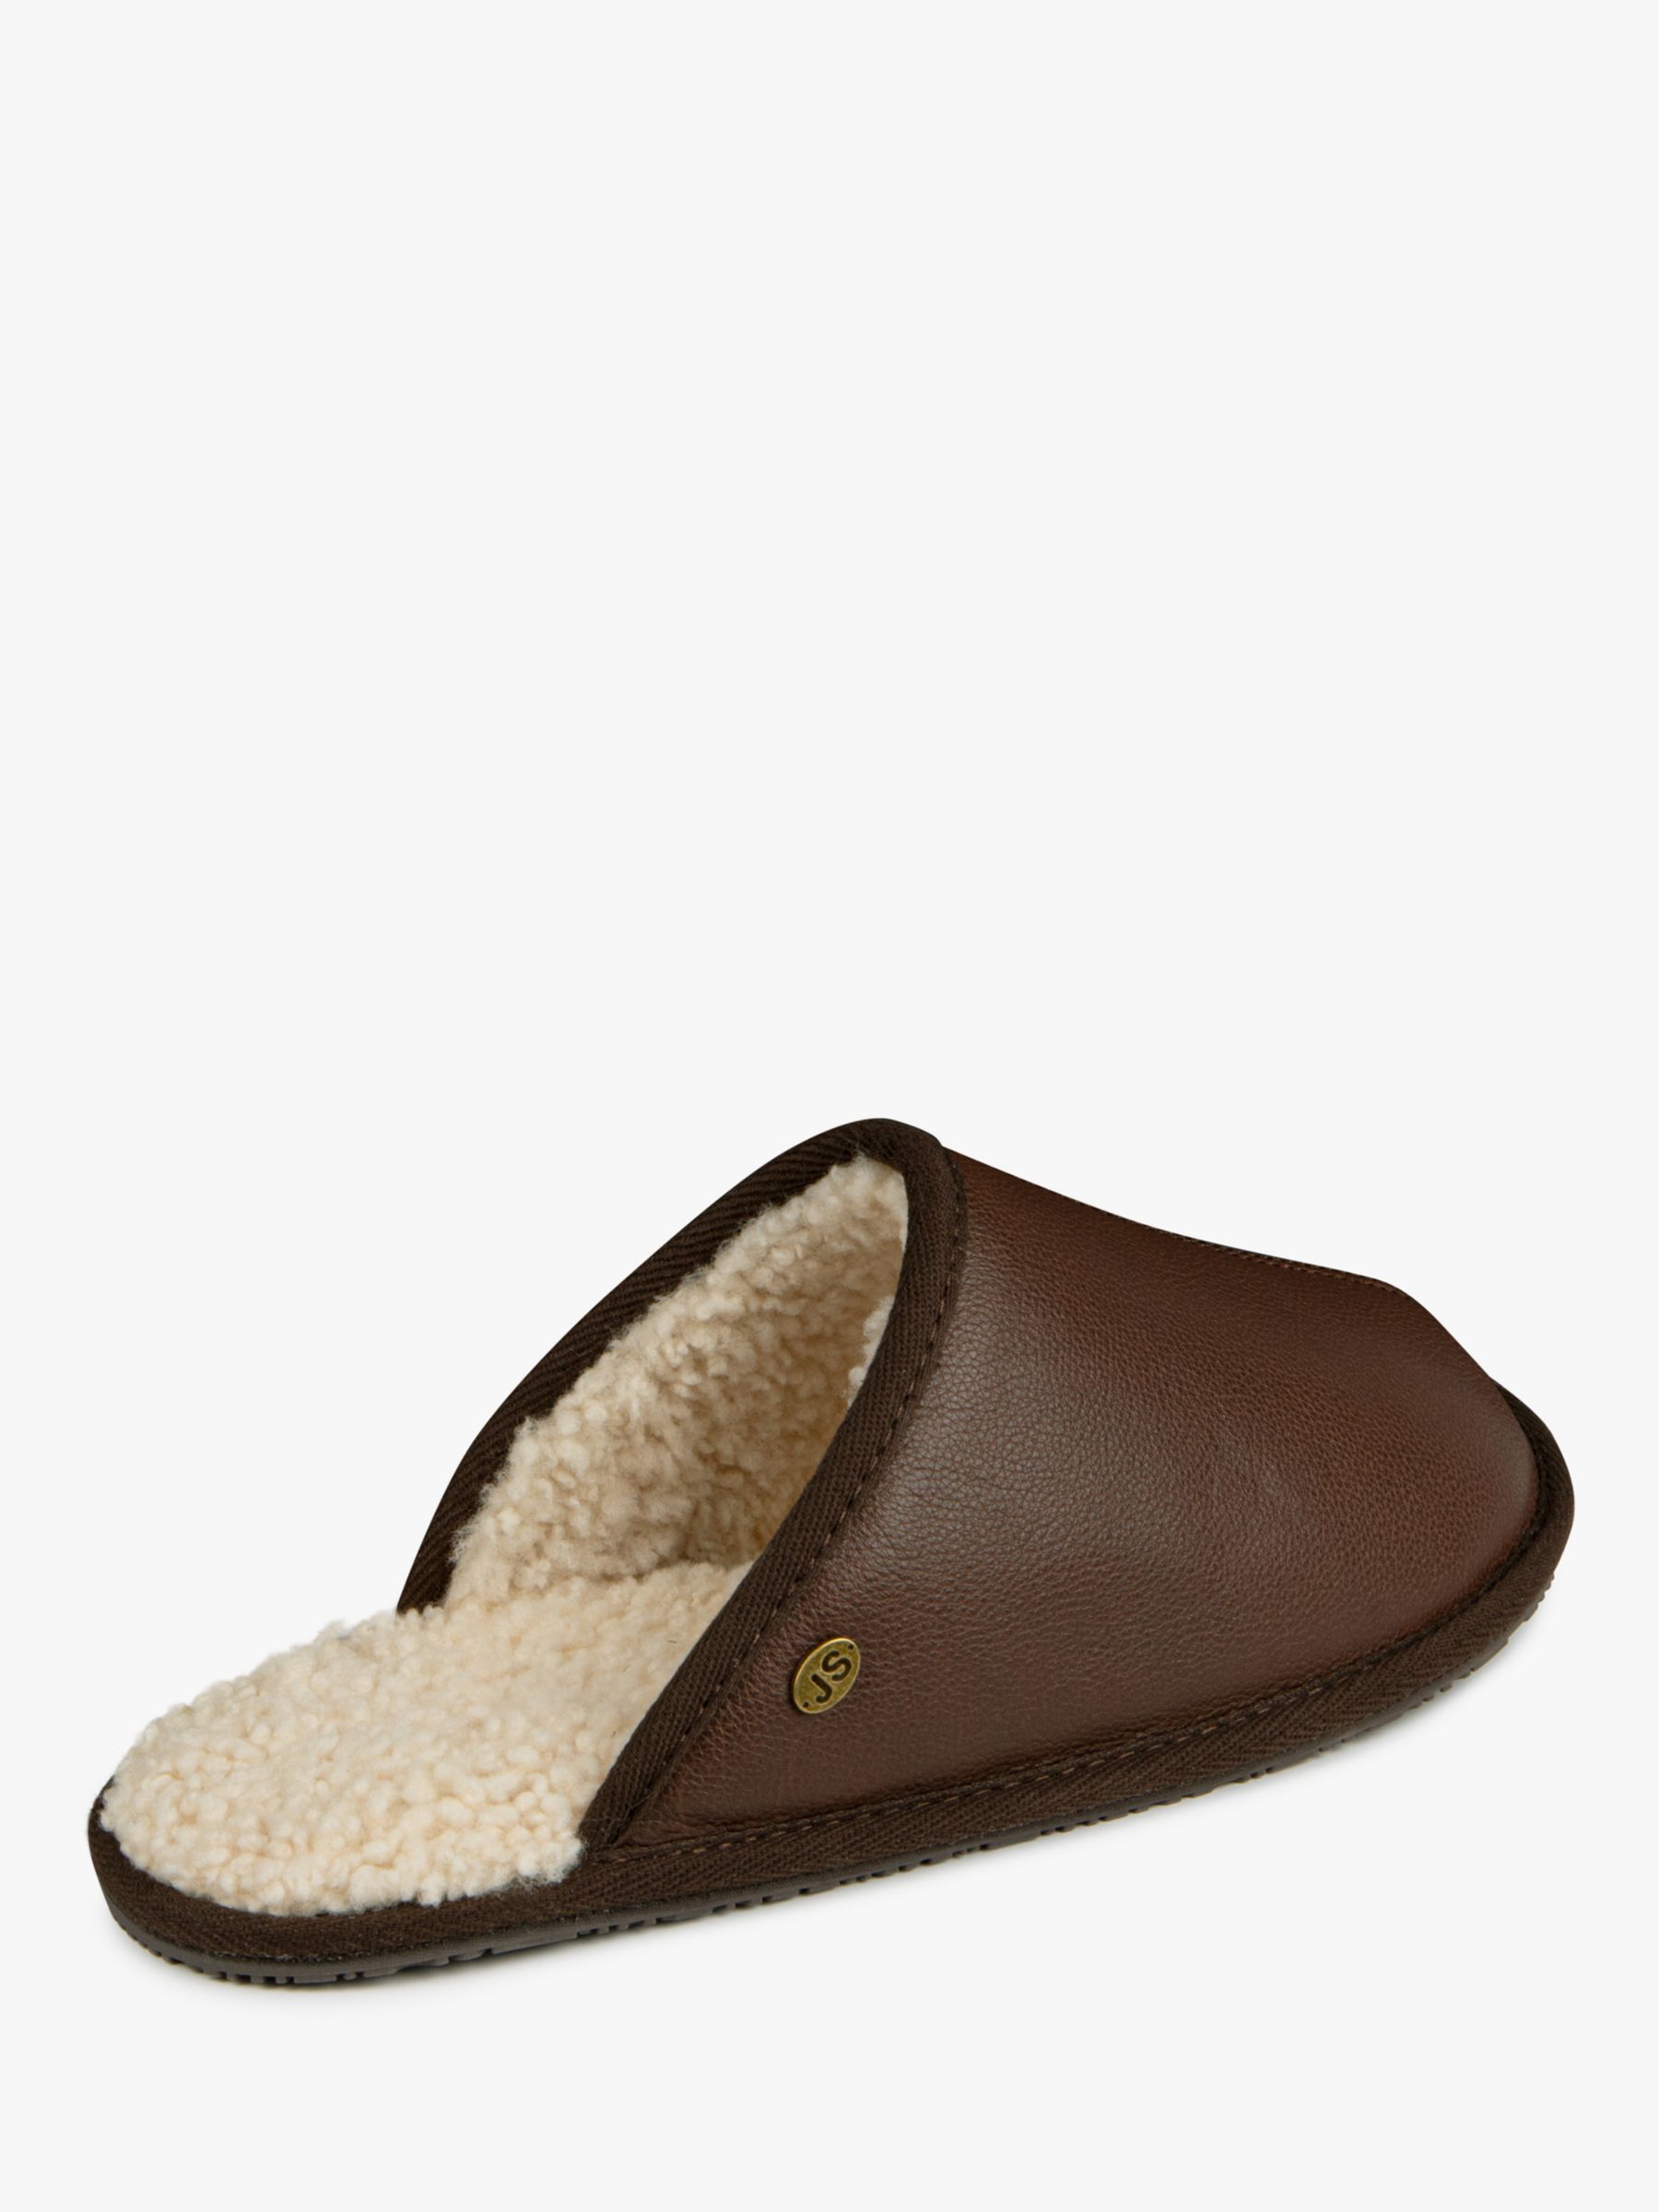 Just Sheepskin Cooper Leather Mule Slippers, Brown, 8